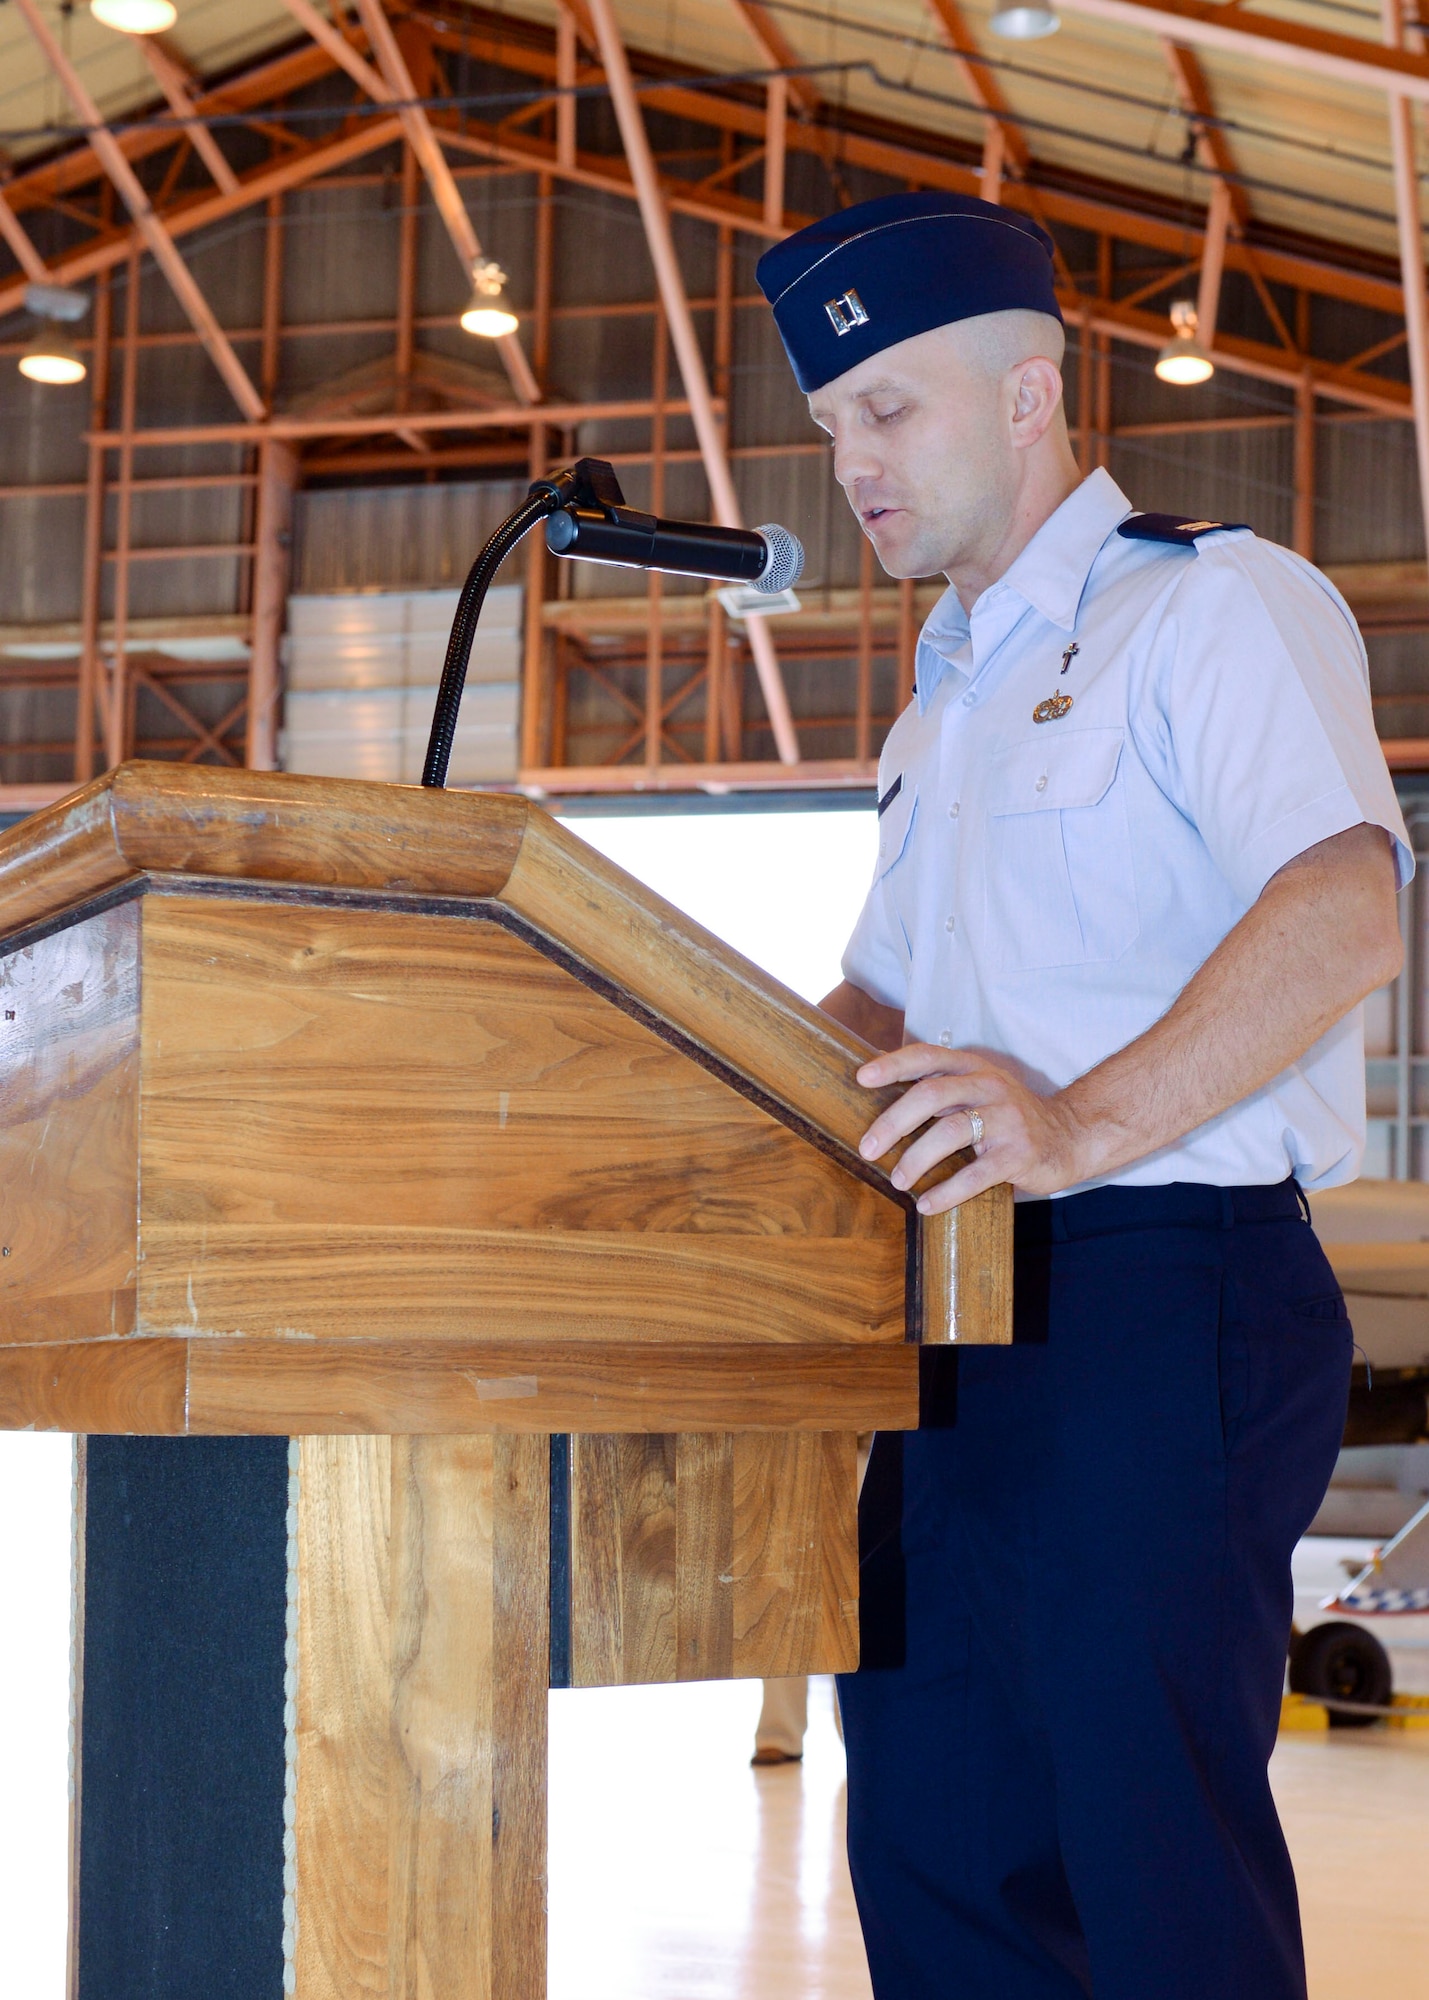 Chaplain Capt. Kevin Rash gives the opening prayer at the 49th Aircraft Maintenance Squadron Change of Command at Holloman Air Force Base, N.M. June 9, 2015. During the Change of Command, Col. Michael Shea, the 49th Maintenance Group commander was the presiding officer and Maj. Rebecca A. Hart, the 49th AMXS incoming commander, assumed command. The 49th AMXS has 359 assigned Airmen to maintain nine MQ-1B Predator remotely piloted aircraft in support of the 6th Reconnaissance Squadron, 22 MQ-9A Reaper remotely piloted aircraft in support of the 9th and 29th Attack Squadrons and 11 ground control stations and associated satellite communications assets that encompass command and control capability for the aircraft. (U.S. Air Force photo by Staff Sgt. E’Lysia A. Wray/Released)